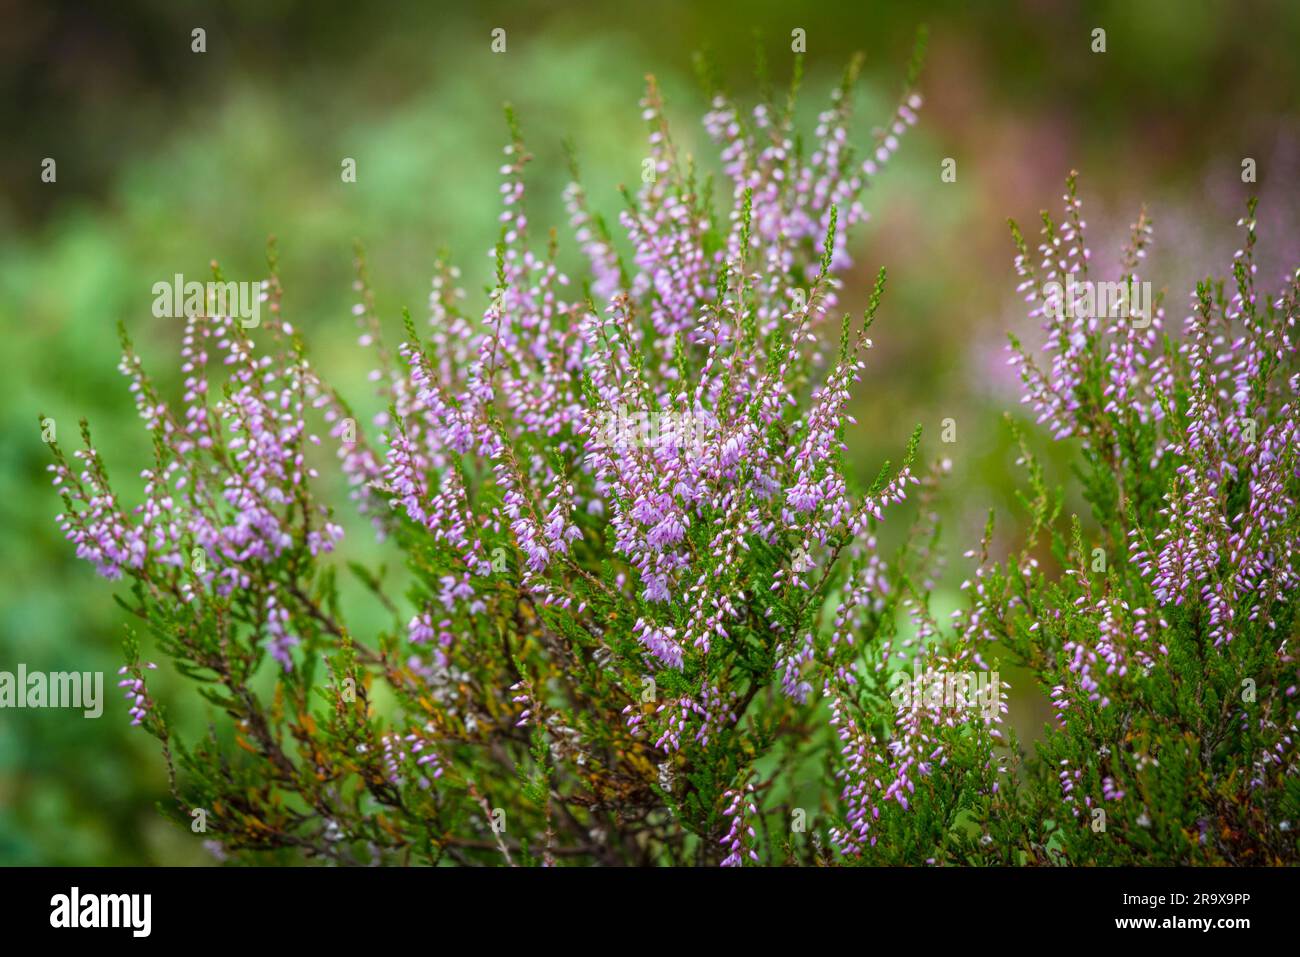 Heather plant in wild nature in the summer on a green blurry background Stock Photo